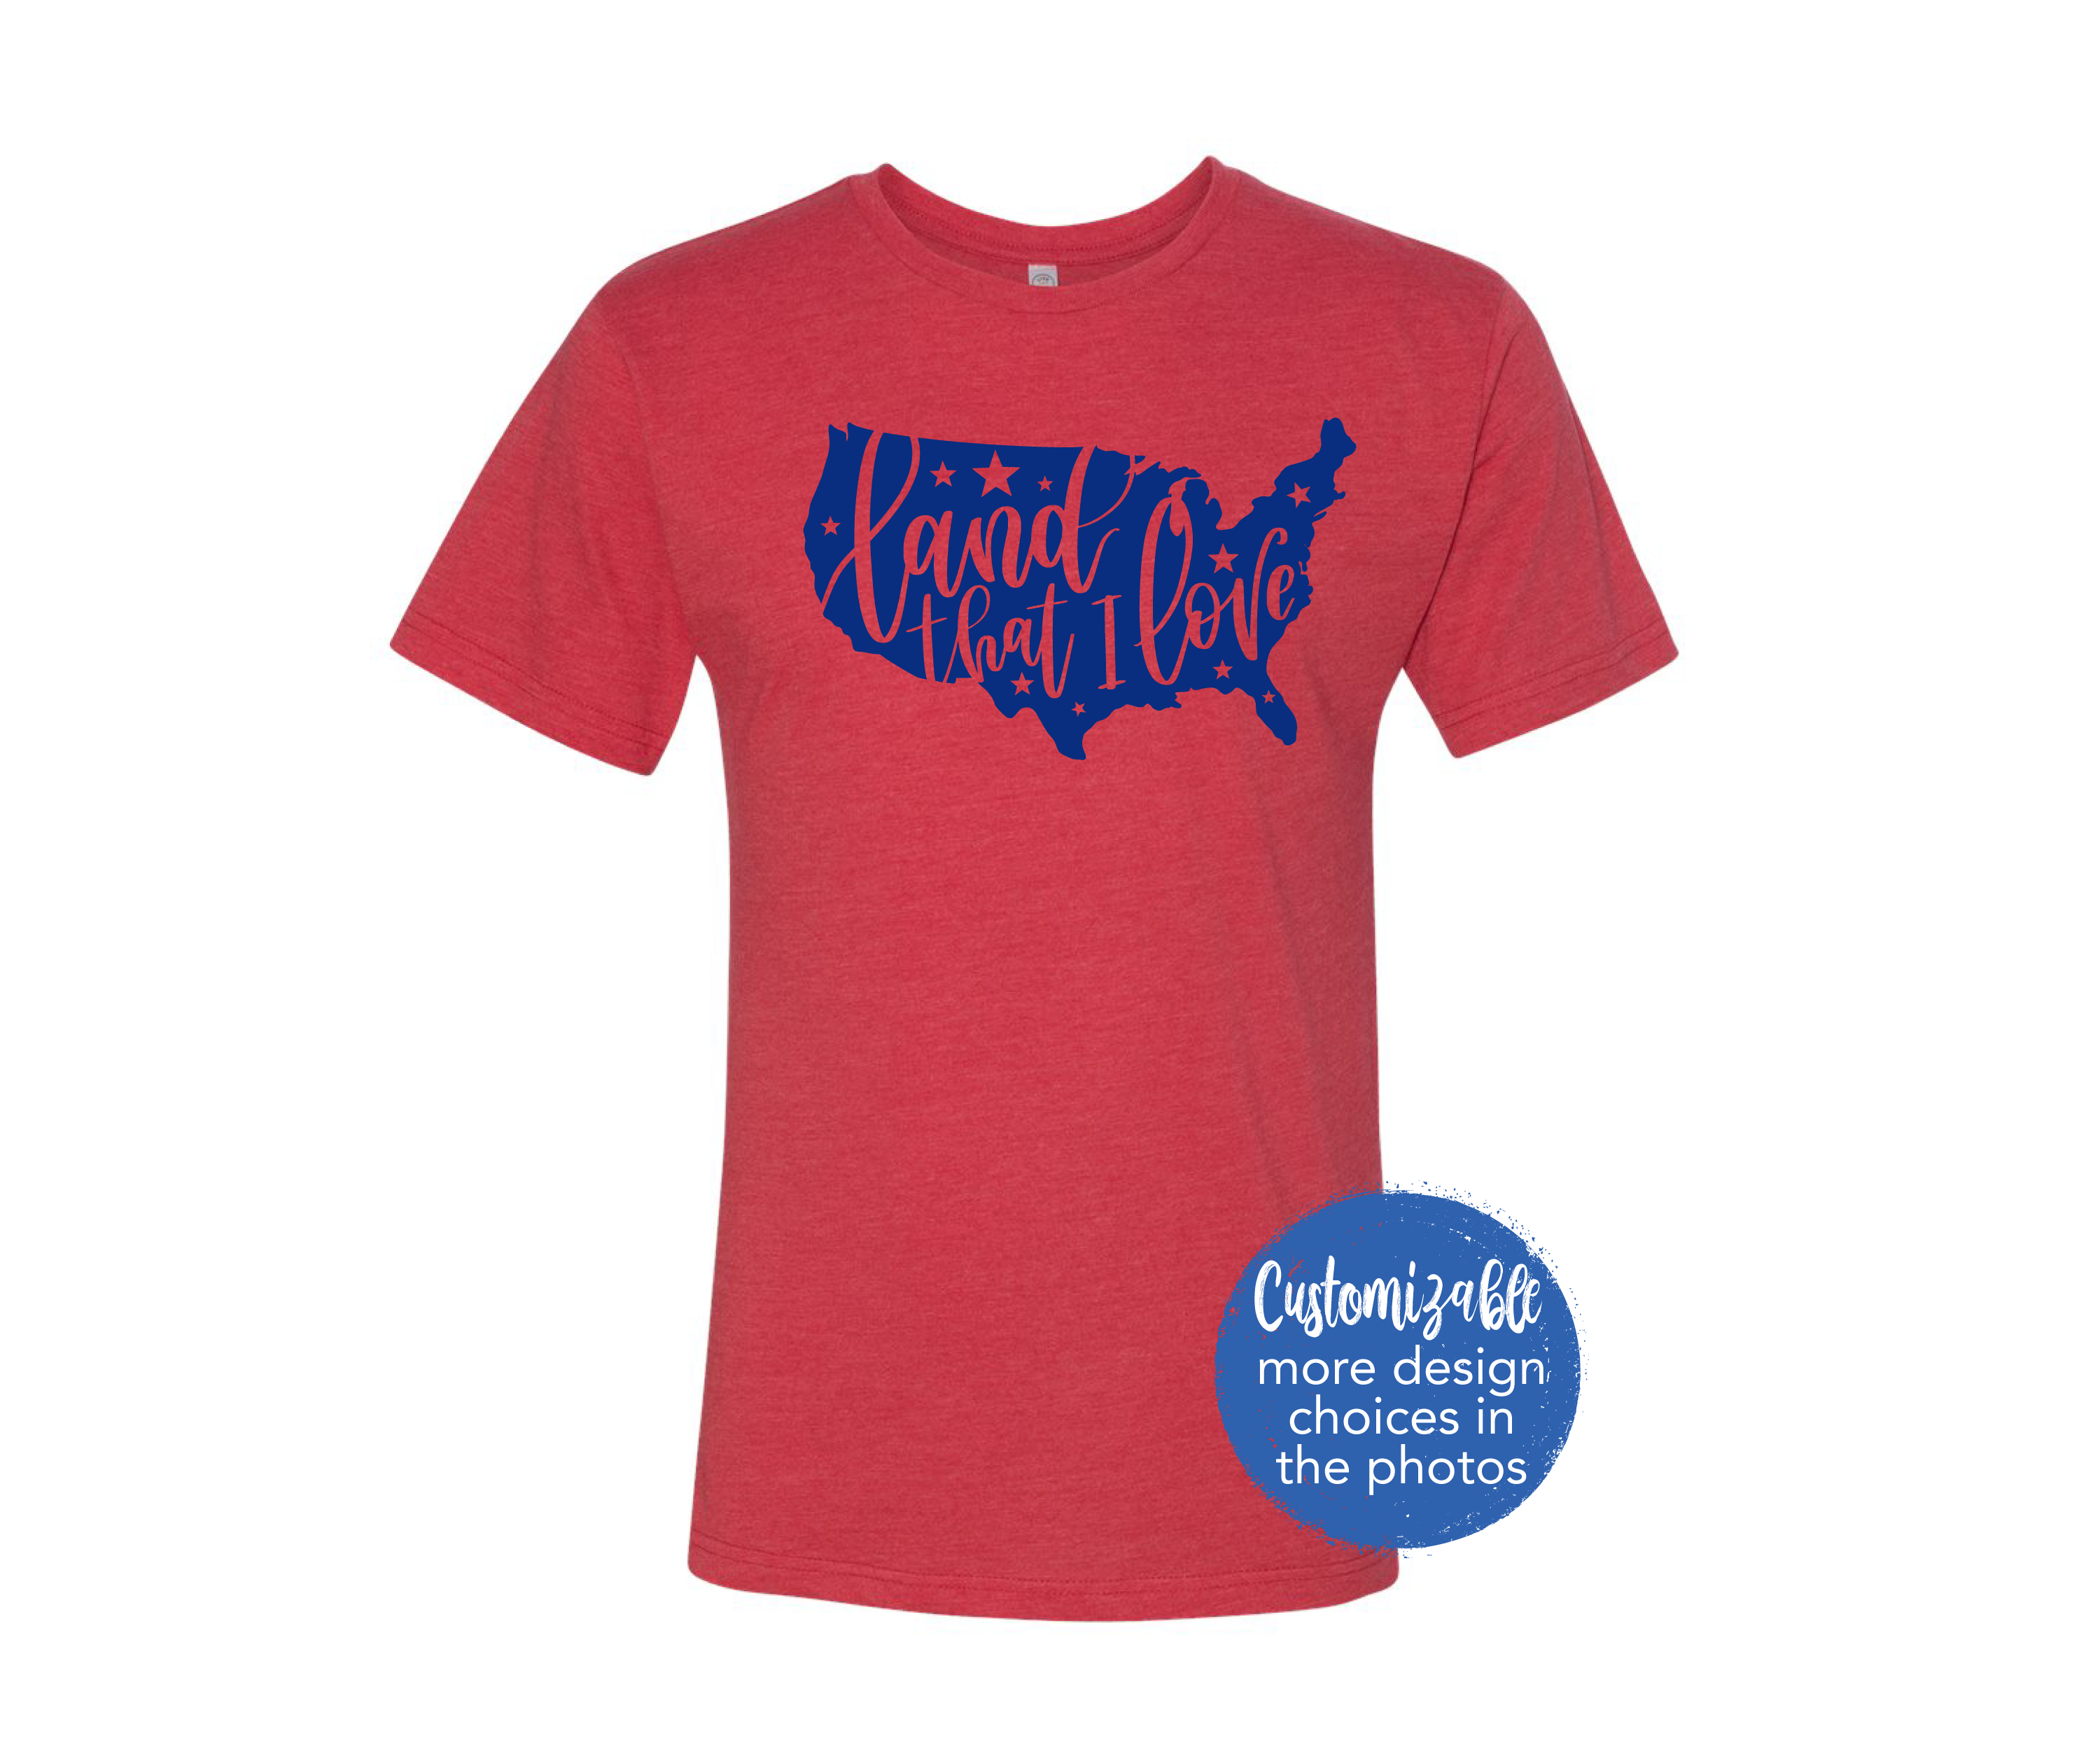 Faith Family Fireworks 4th of July Tee Independence Day Celebration Shirt